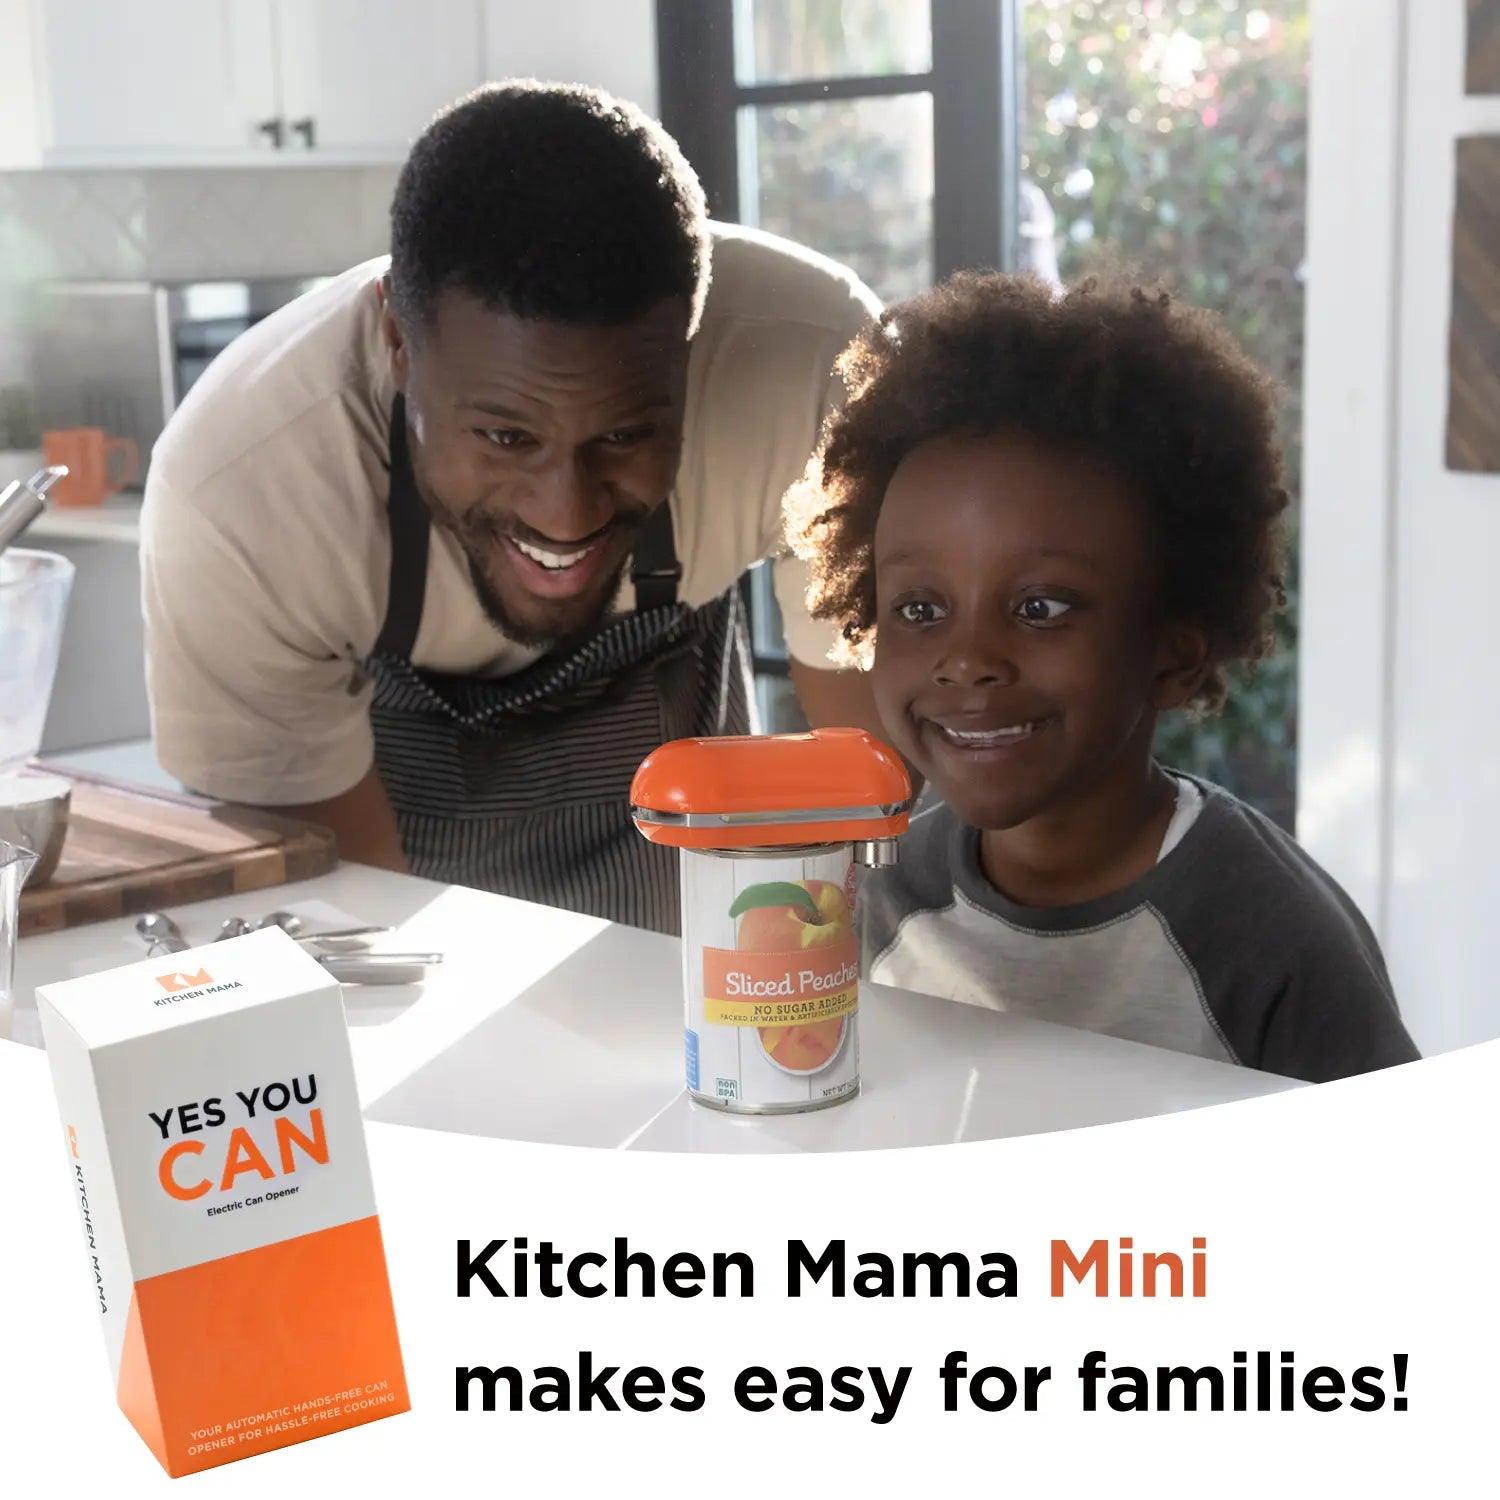 Mini Electric Can Opener- Best For Smaller Hands